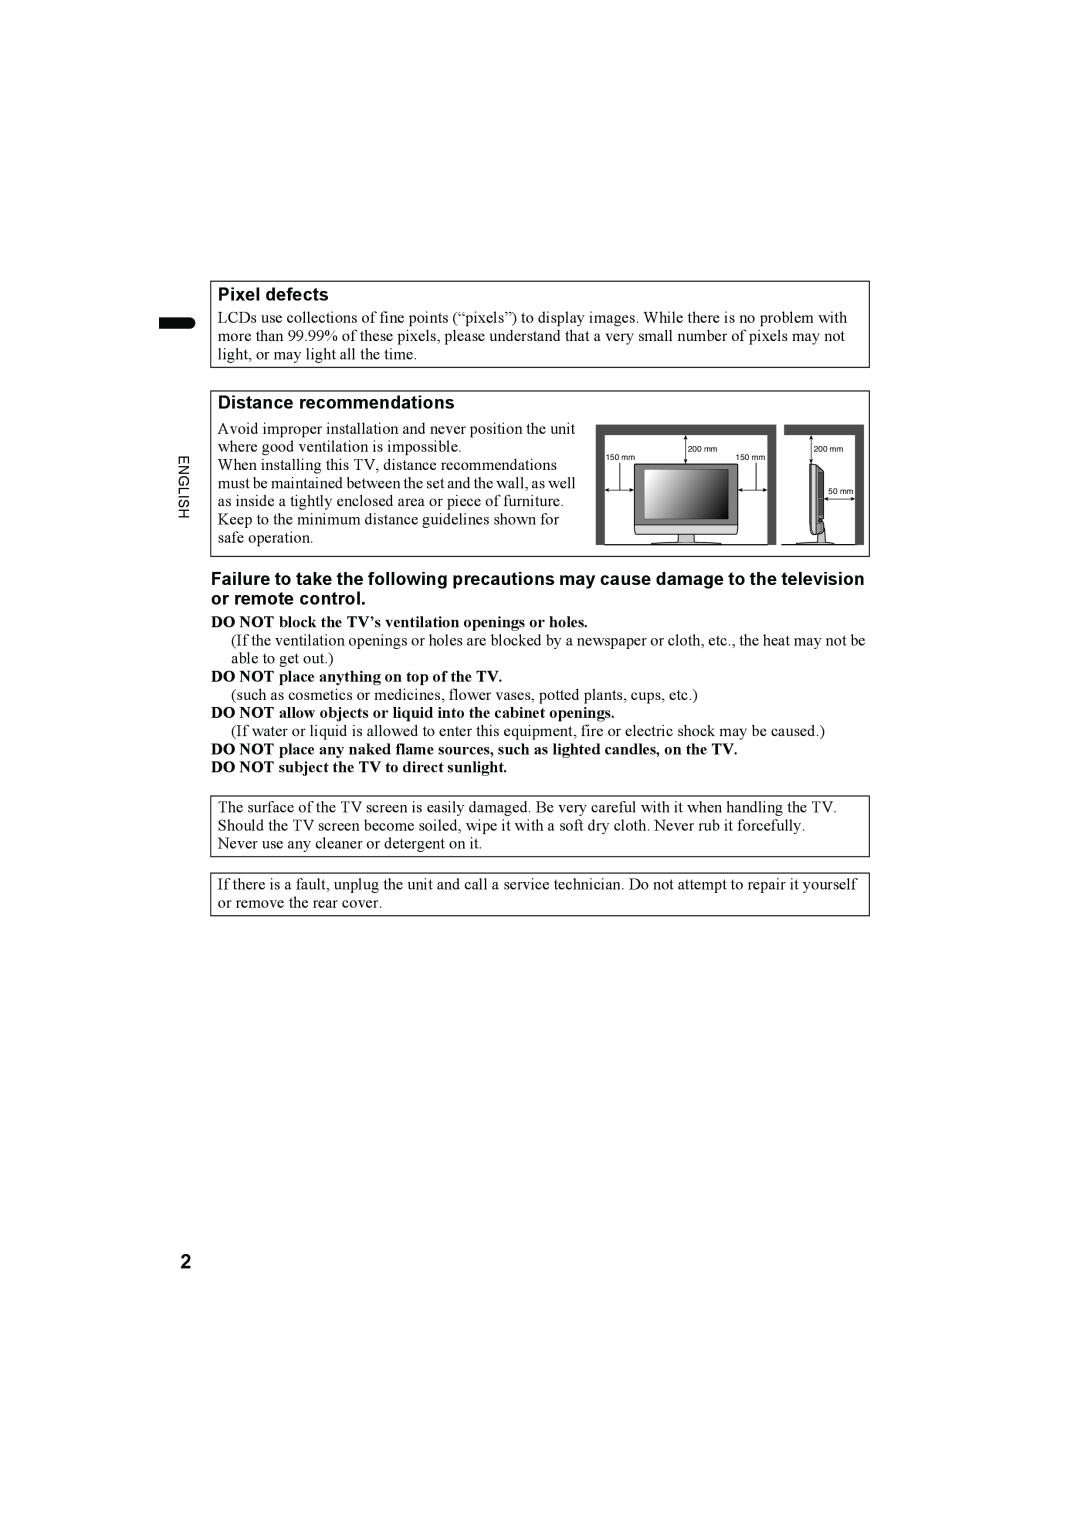 JVC LT-Z32SX4B manual Pixel defects, Distance recommendations, DO NOT block the TV’s ventilation openings or holes 